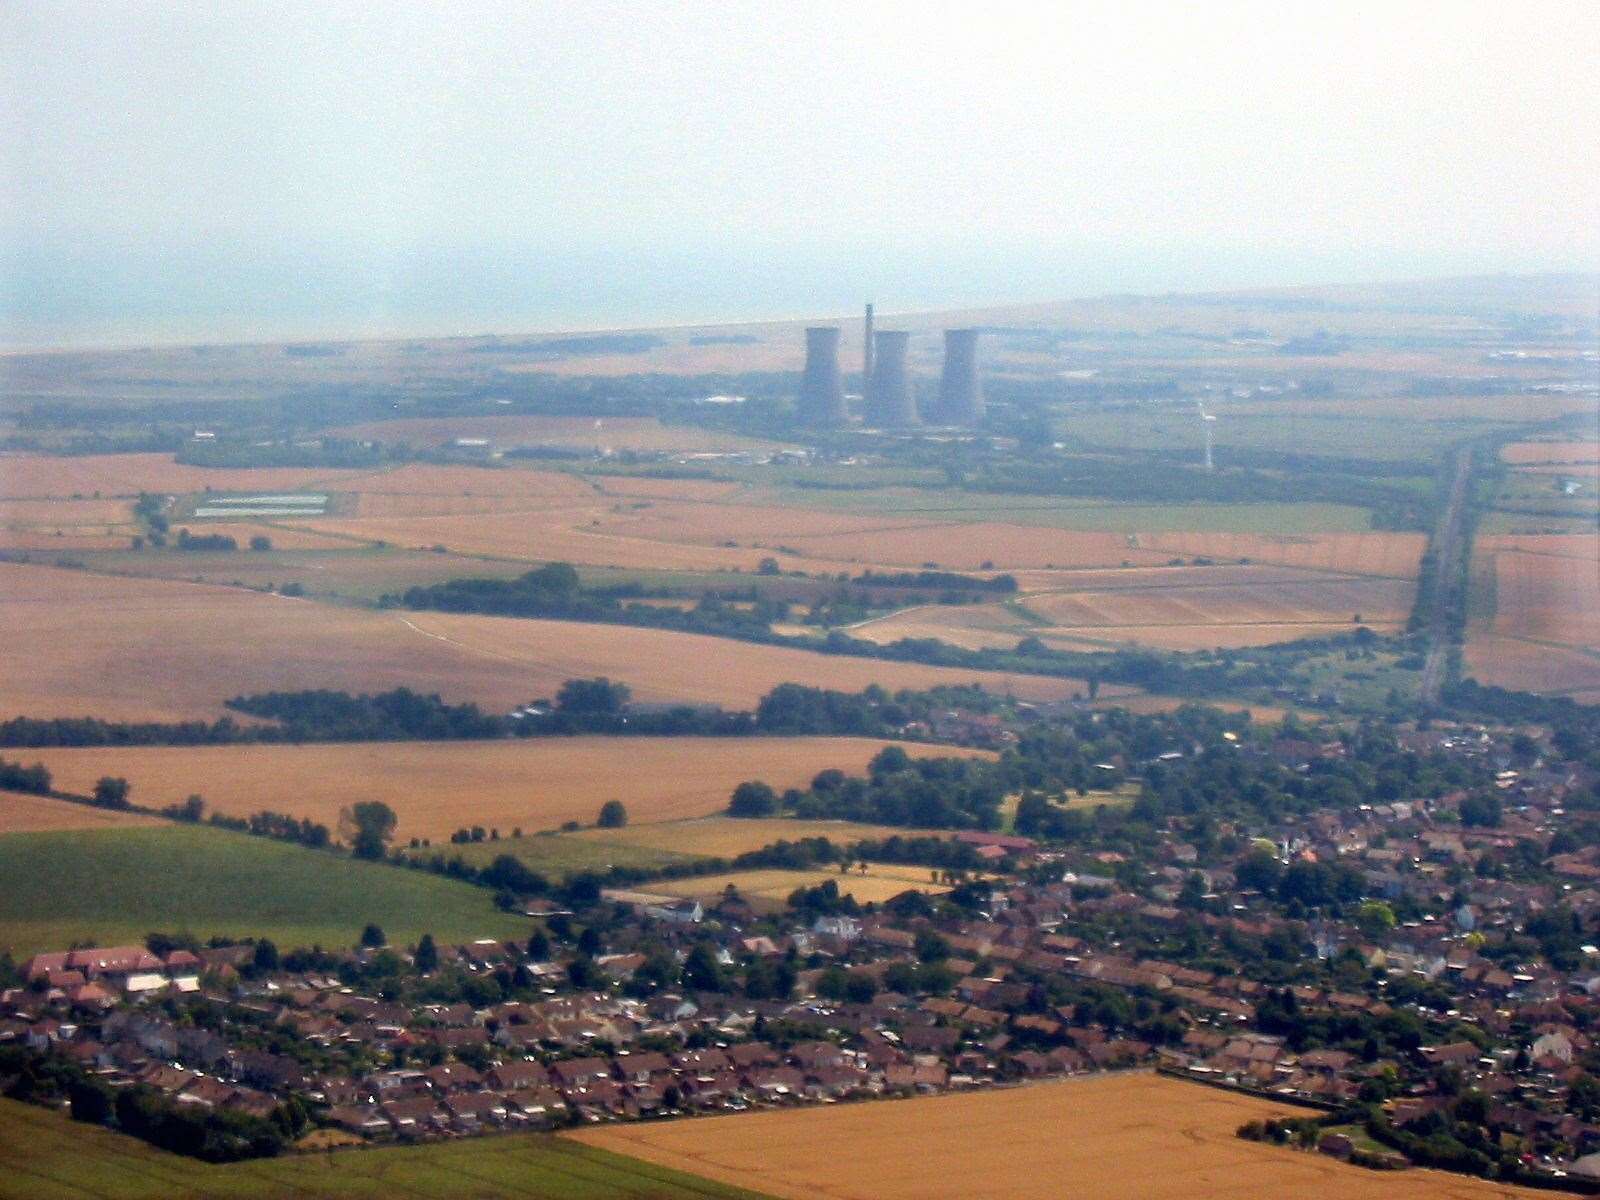 Richborough power station through the haze, and beyond it, Pegwell Bay